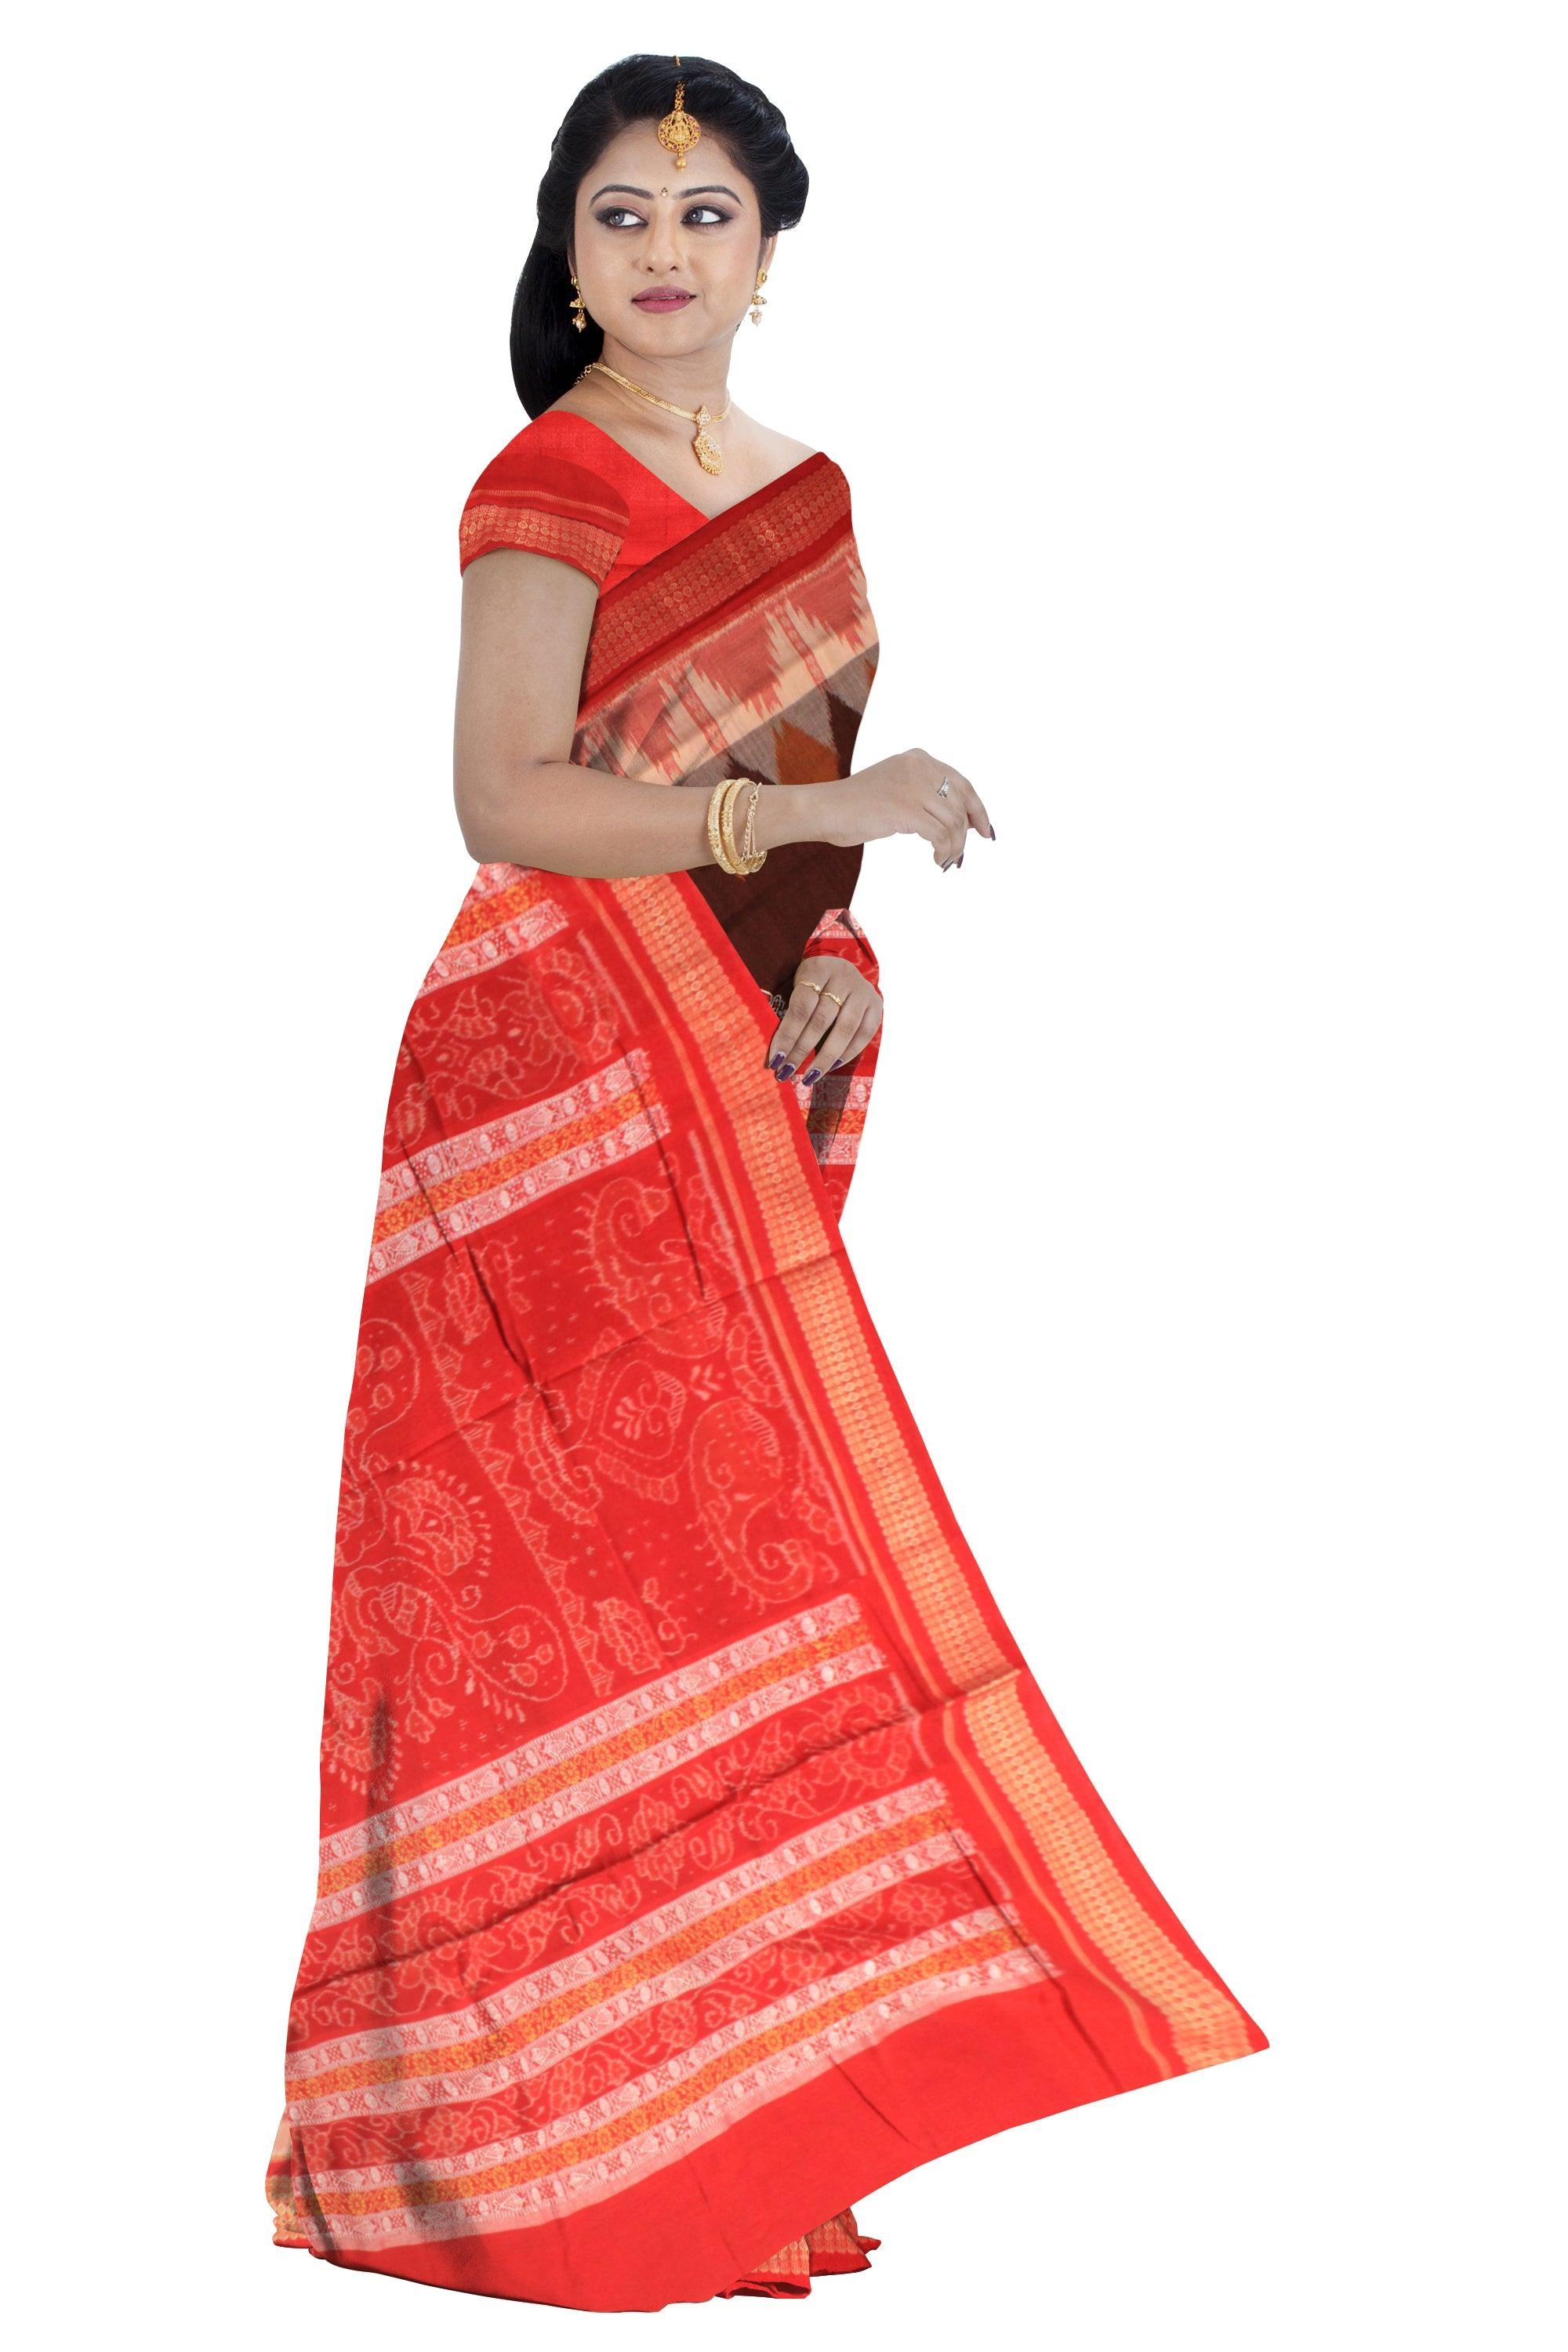 COTTON SAREE WITH FLORA PRINT IN BROWN AND RED AVAILABLE WITH BLOUSE PIECE - Koshali Arts & Crafts Enterprise